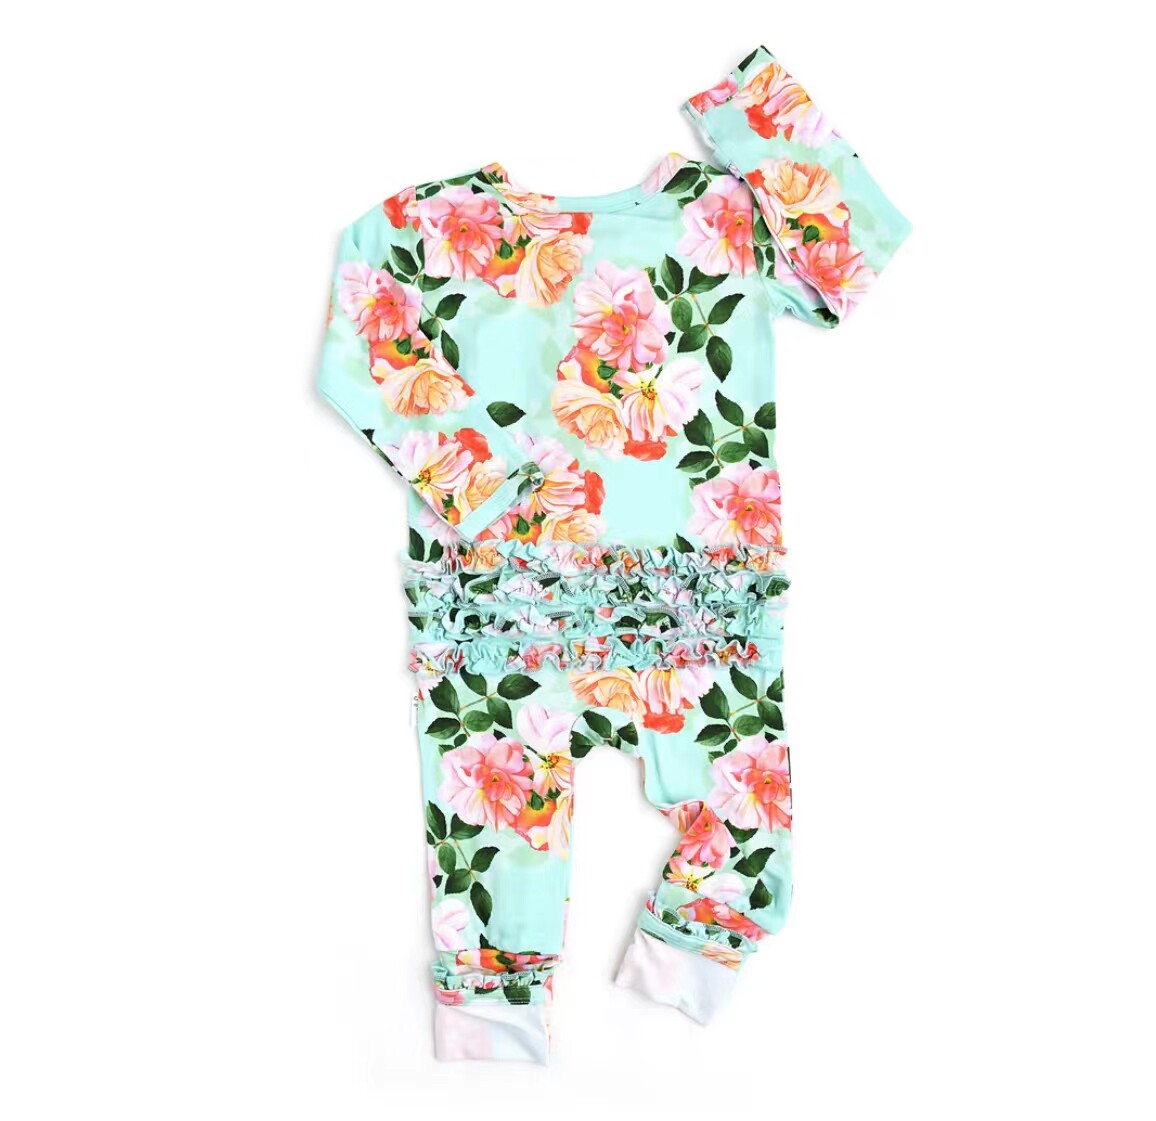 Ruffled Cotton Overall Romper For Baby,bamboo ruffle romper baby